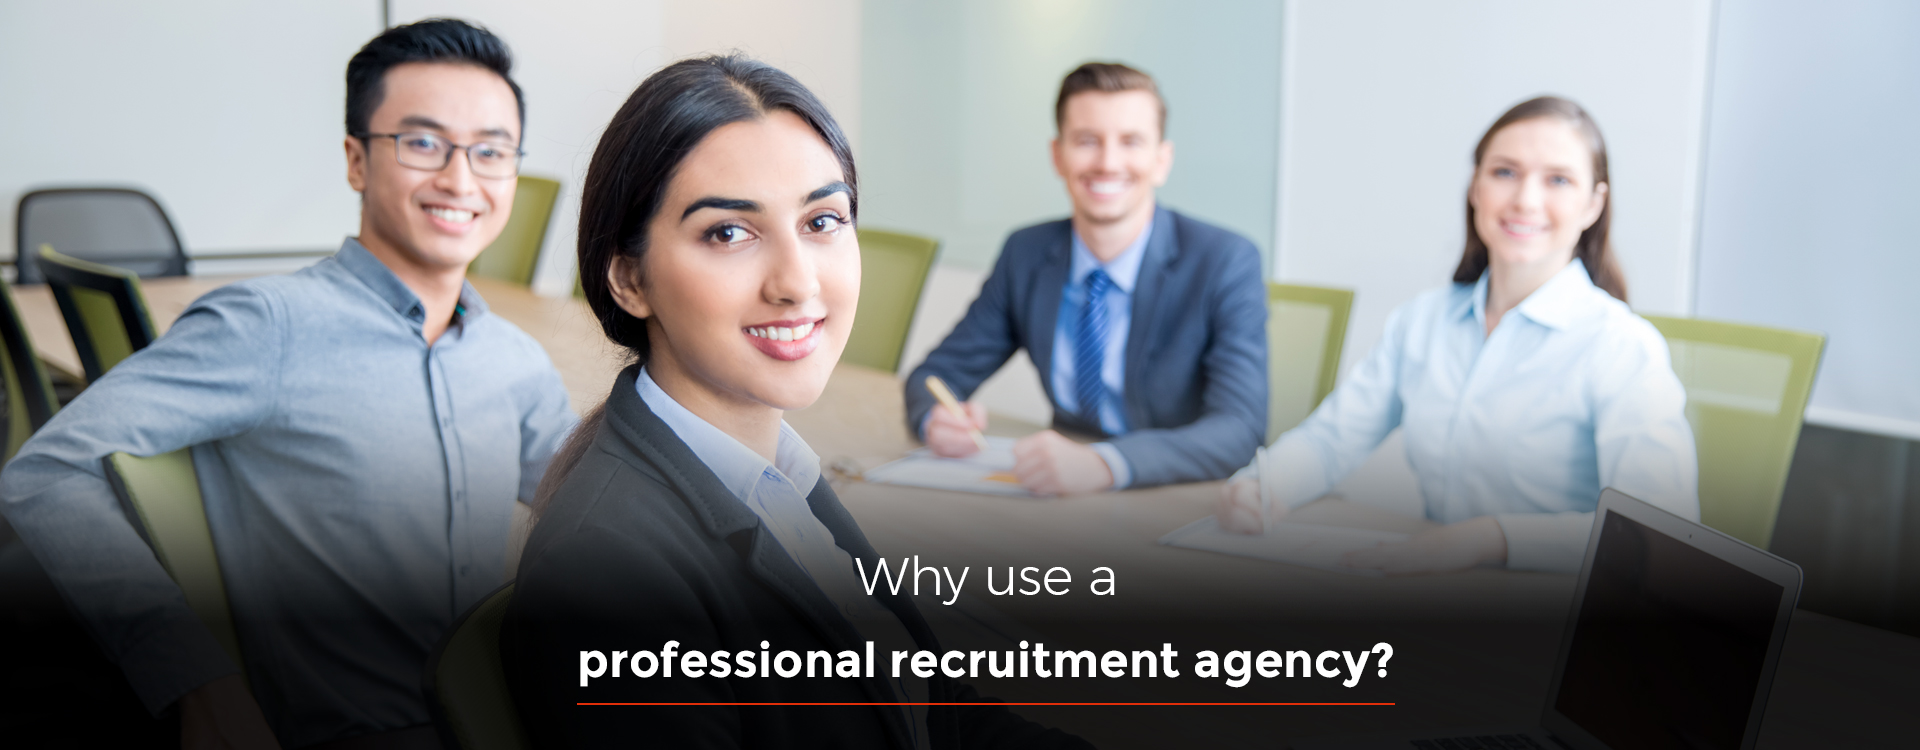 Why use a professional recruitment agency?